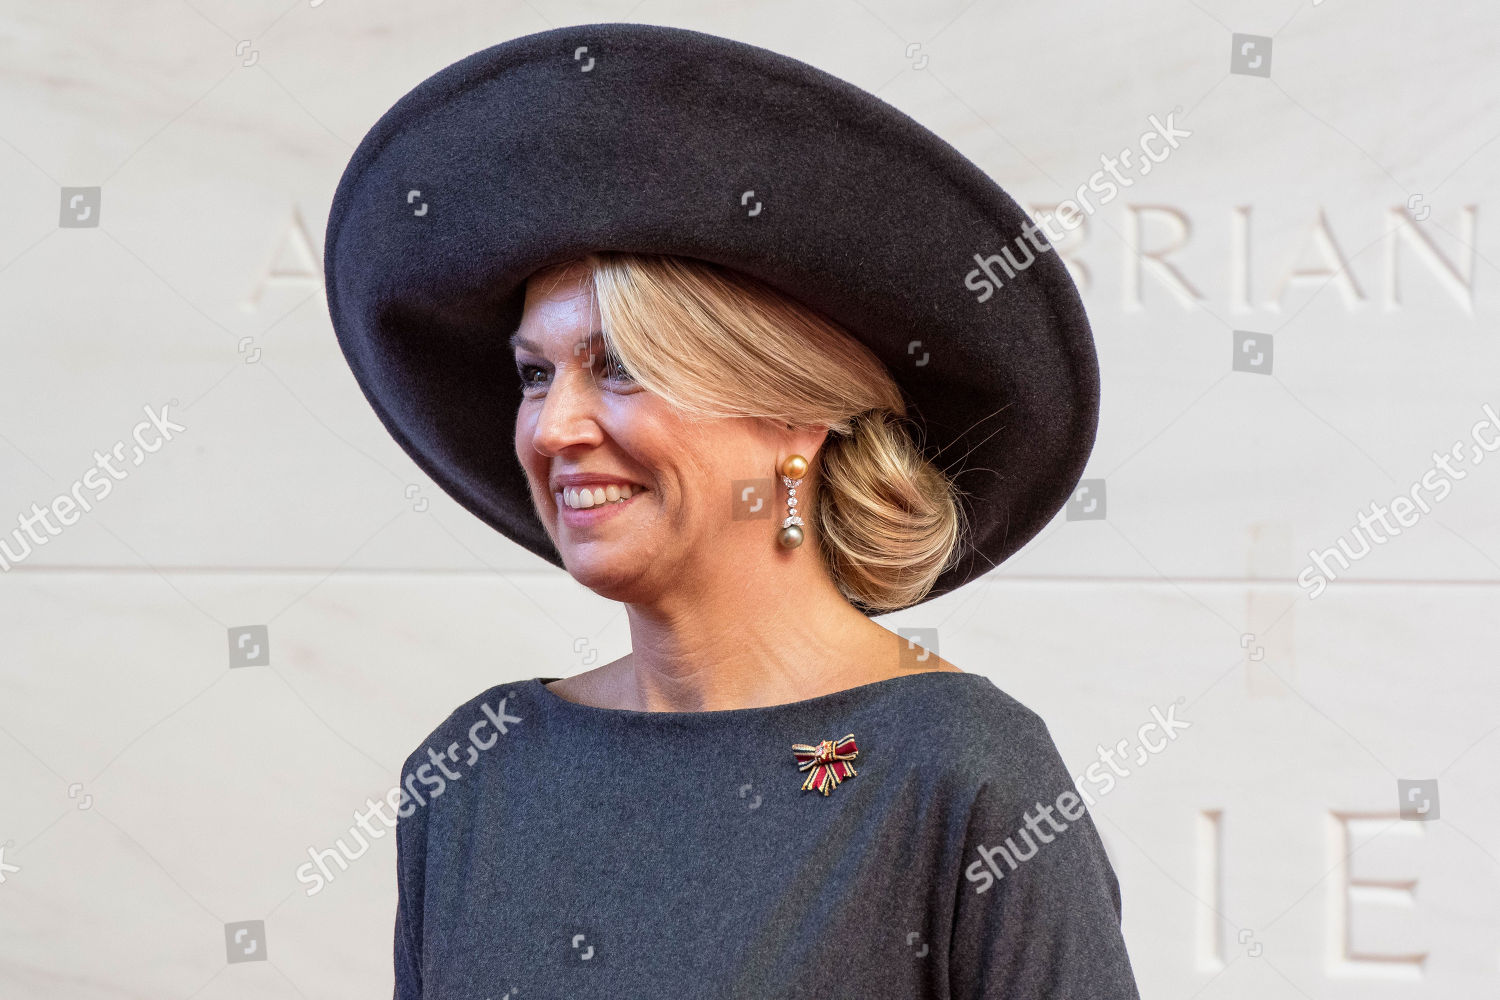 king-willem-alexander-and-queen-maxima-visit-to-germany-shutterstock-editorial-9921325u.jpg